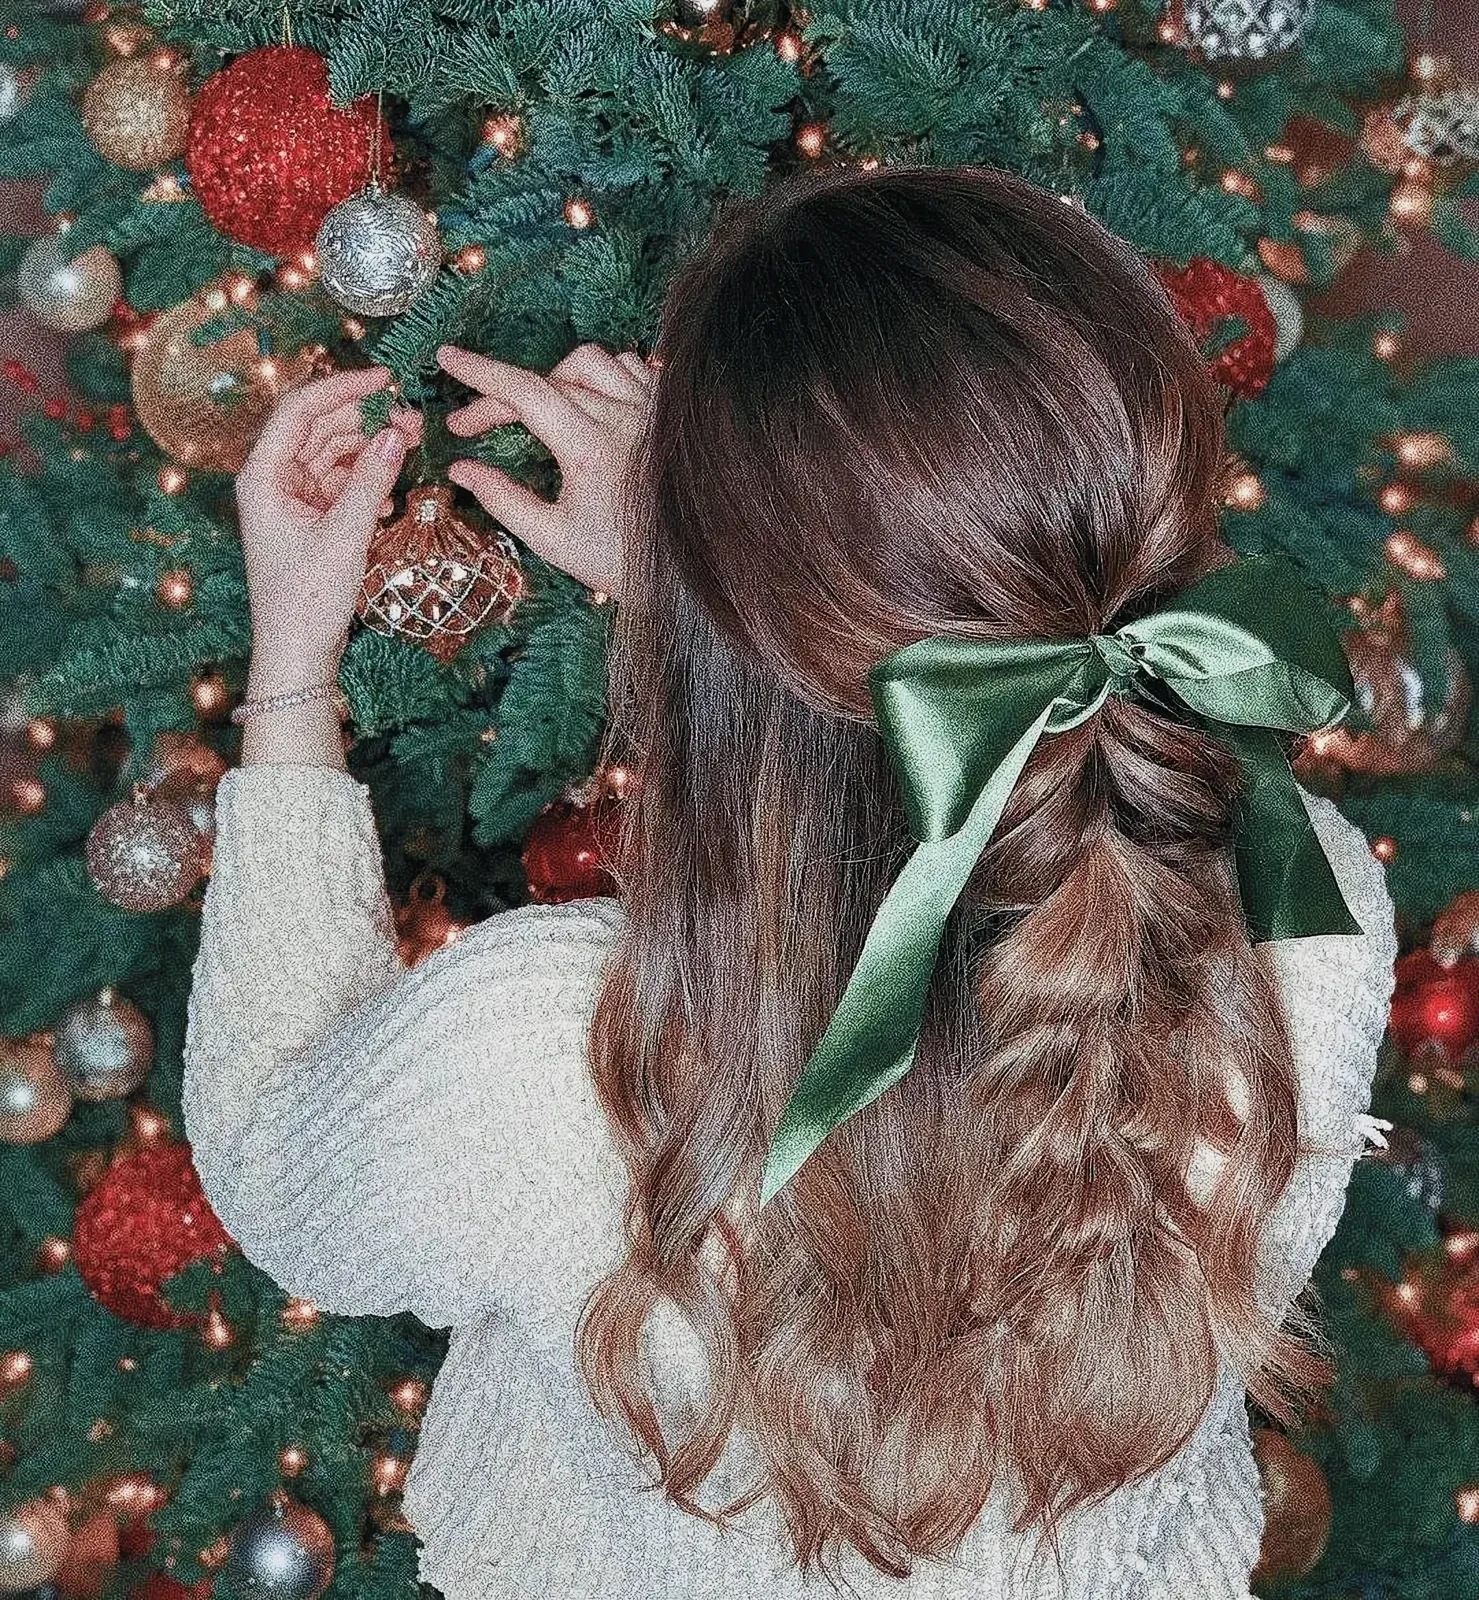 Festive woman with green bow in her hair holding a silver Christmas ornament